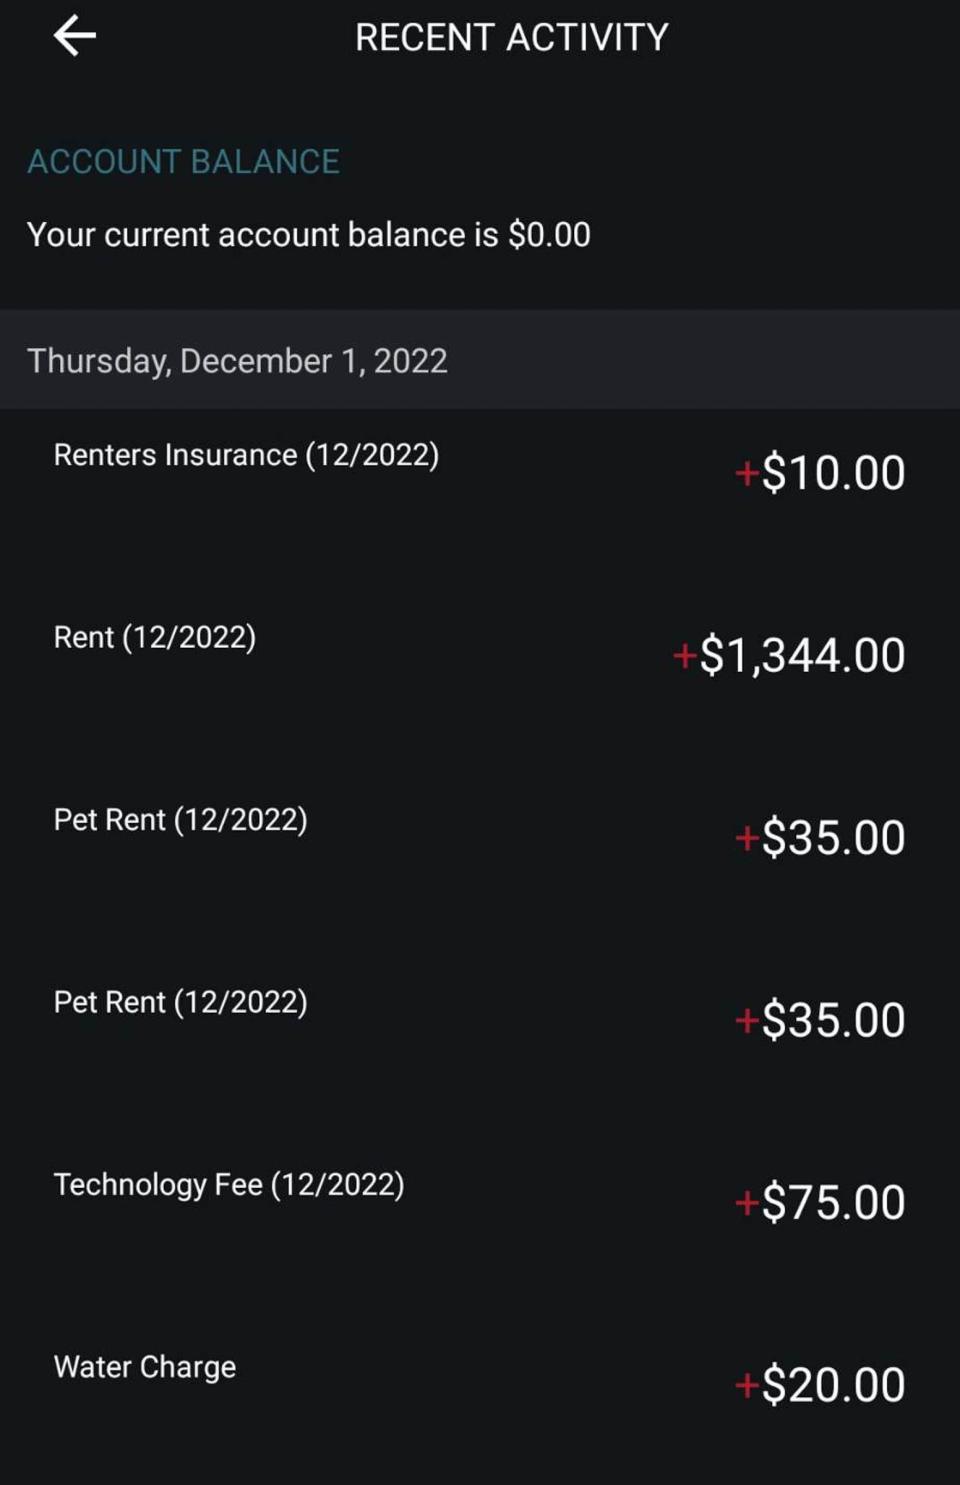 A screenshot of a tenant's phone showing itemized charges for rent and other expenses at Knob Hill Apartments, including "renters insurance" fees required by DTN from Dec. 2022.